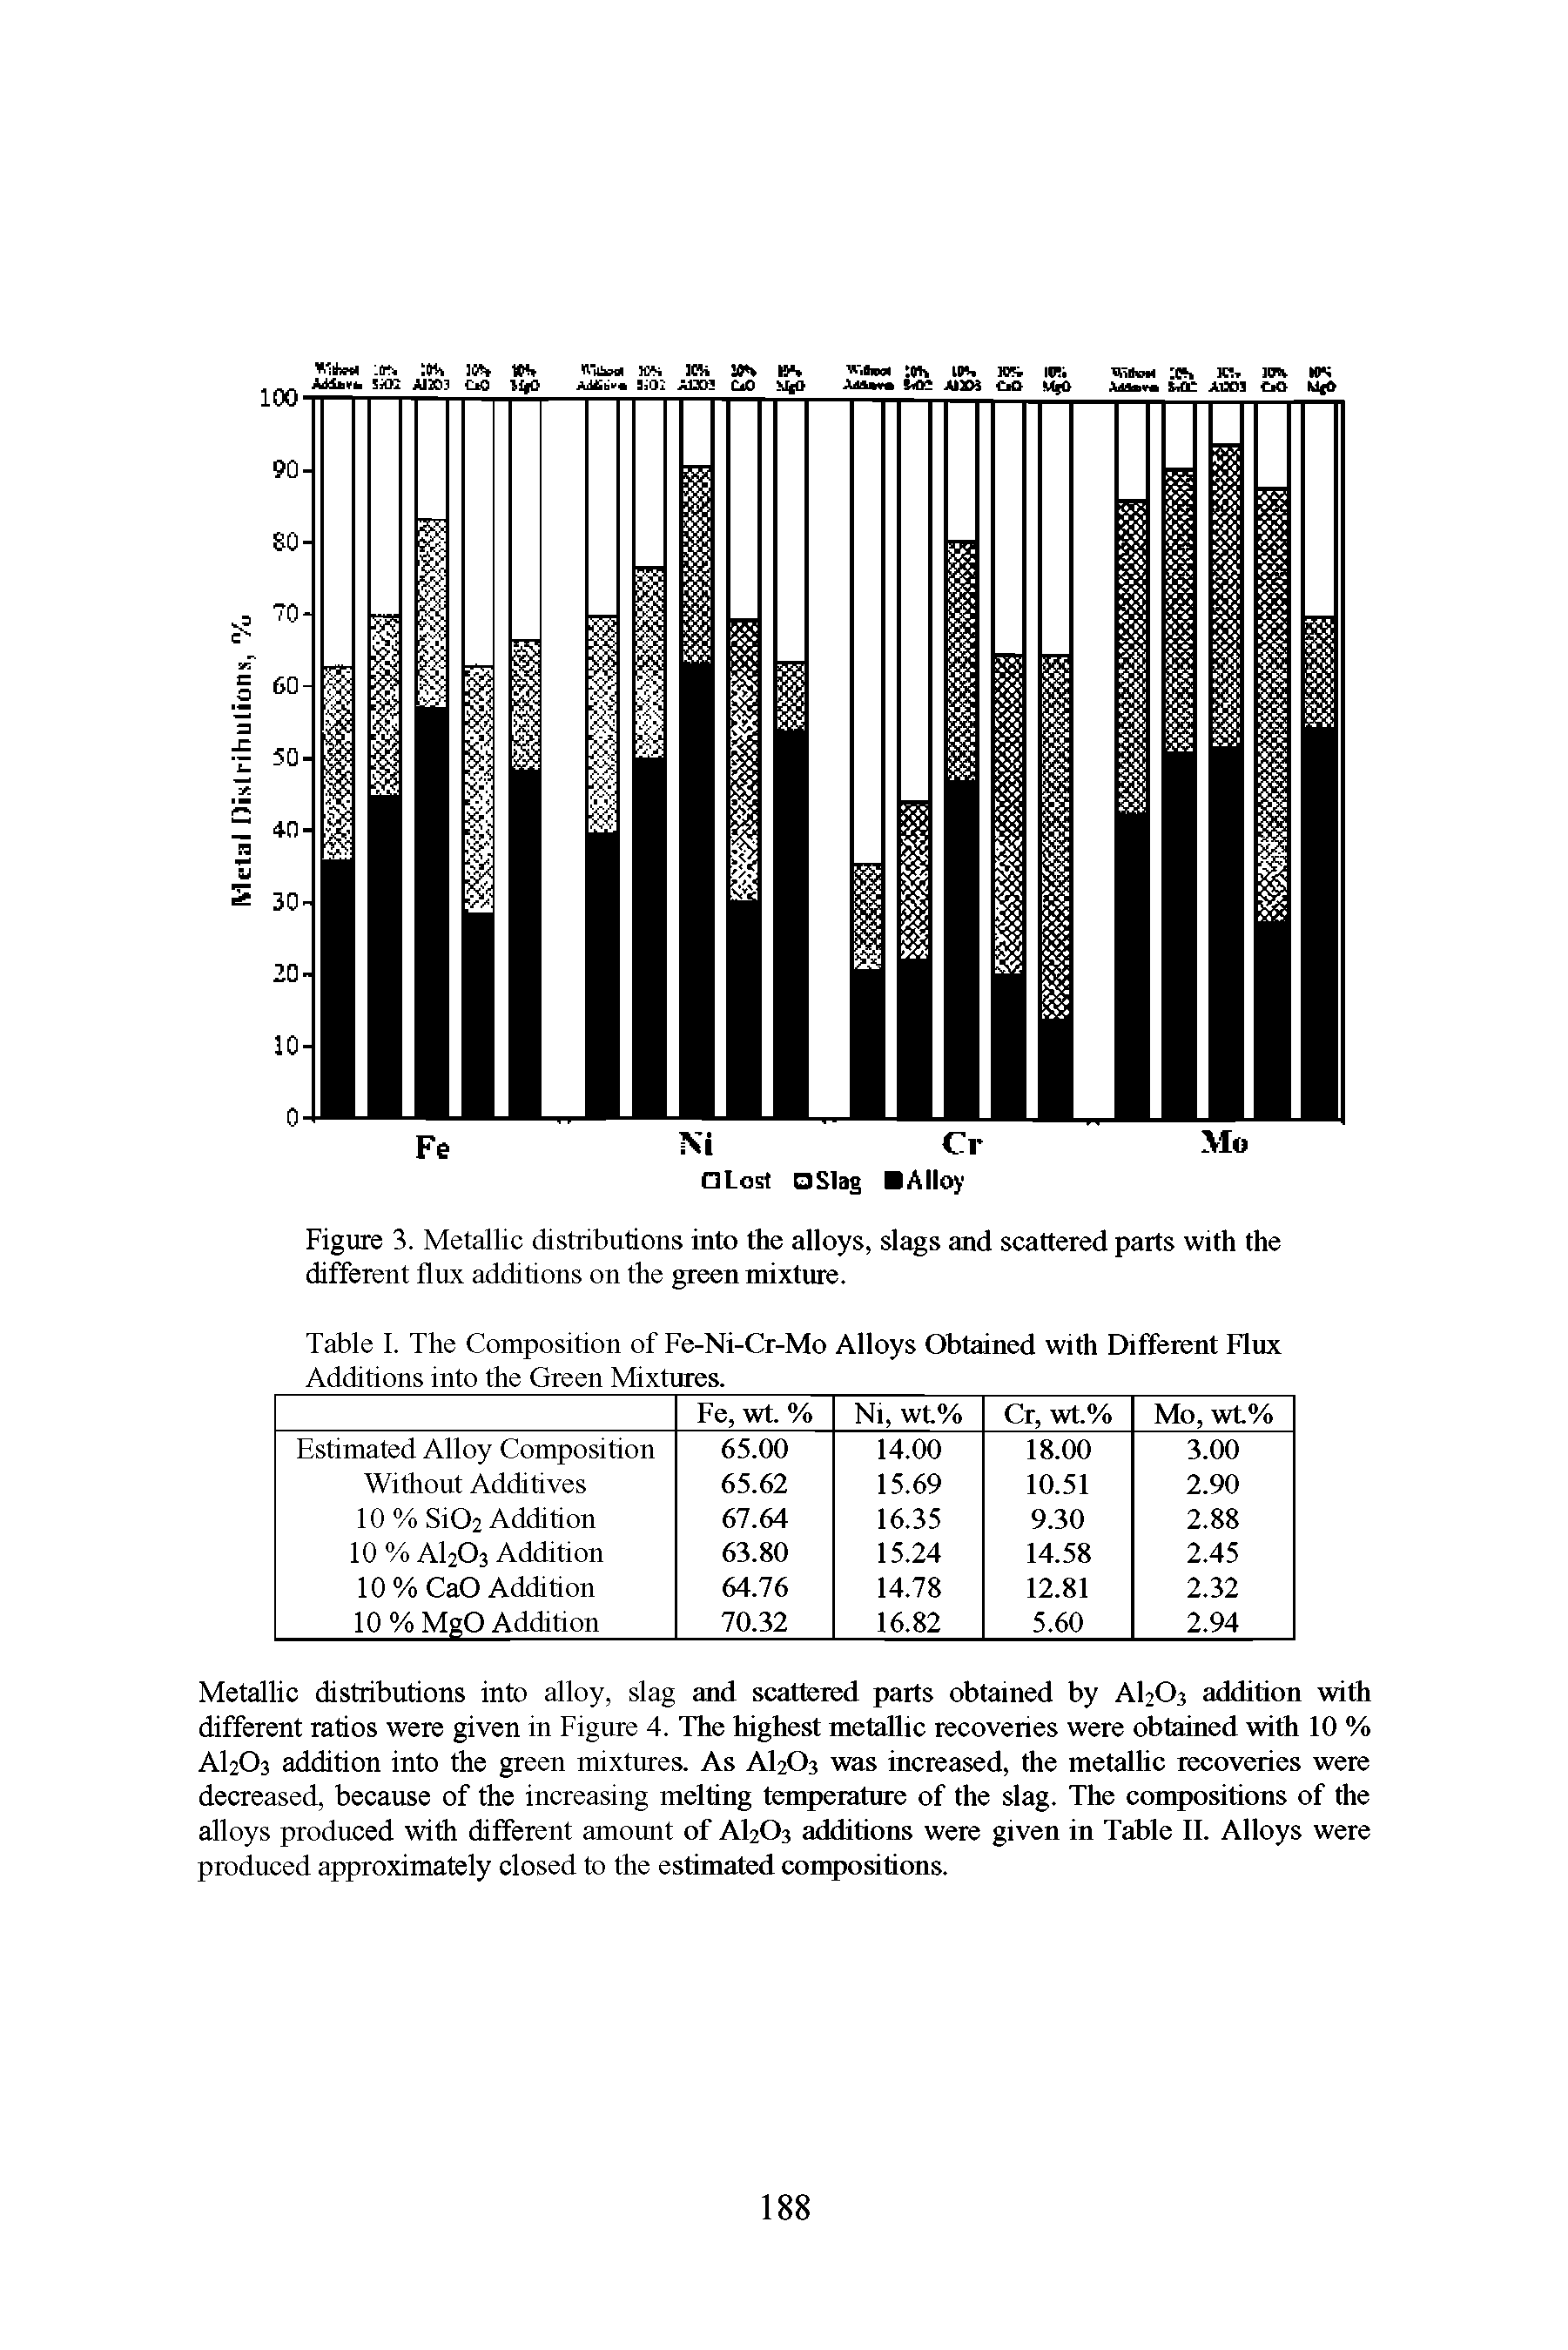 Table I. The Composition of Fe-Ni-Cr-Mo Alloys Obtained with Different Flux Additions into the Green Mixtures.